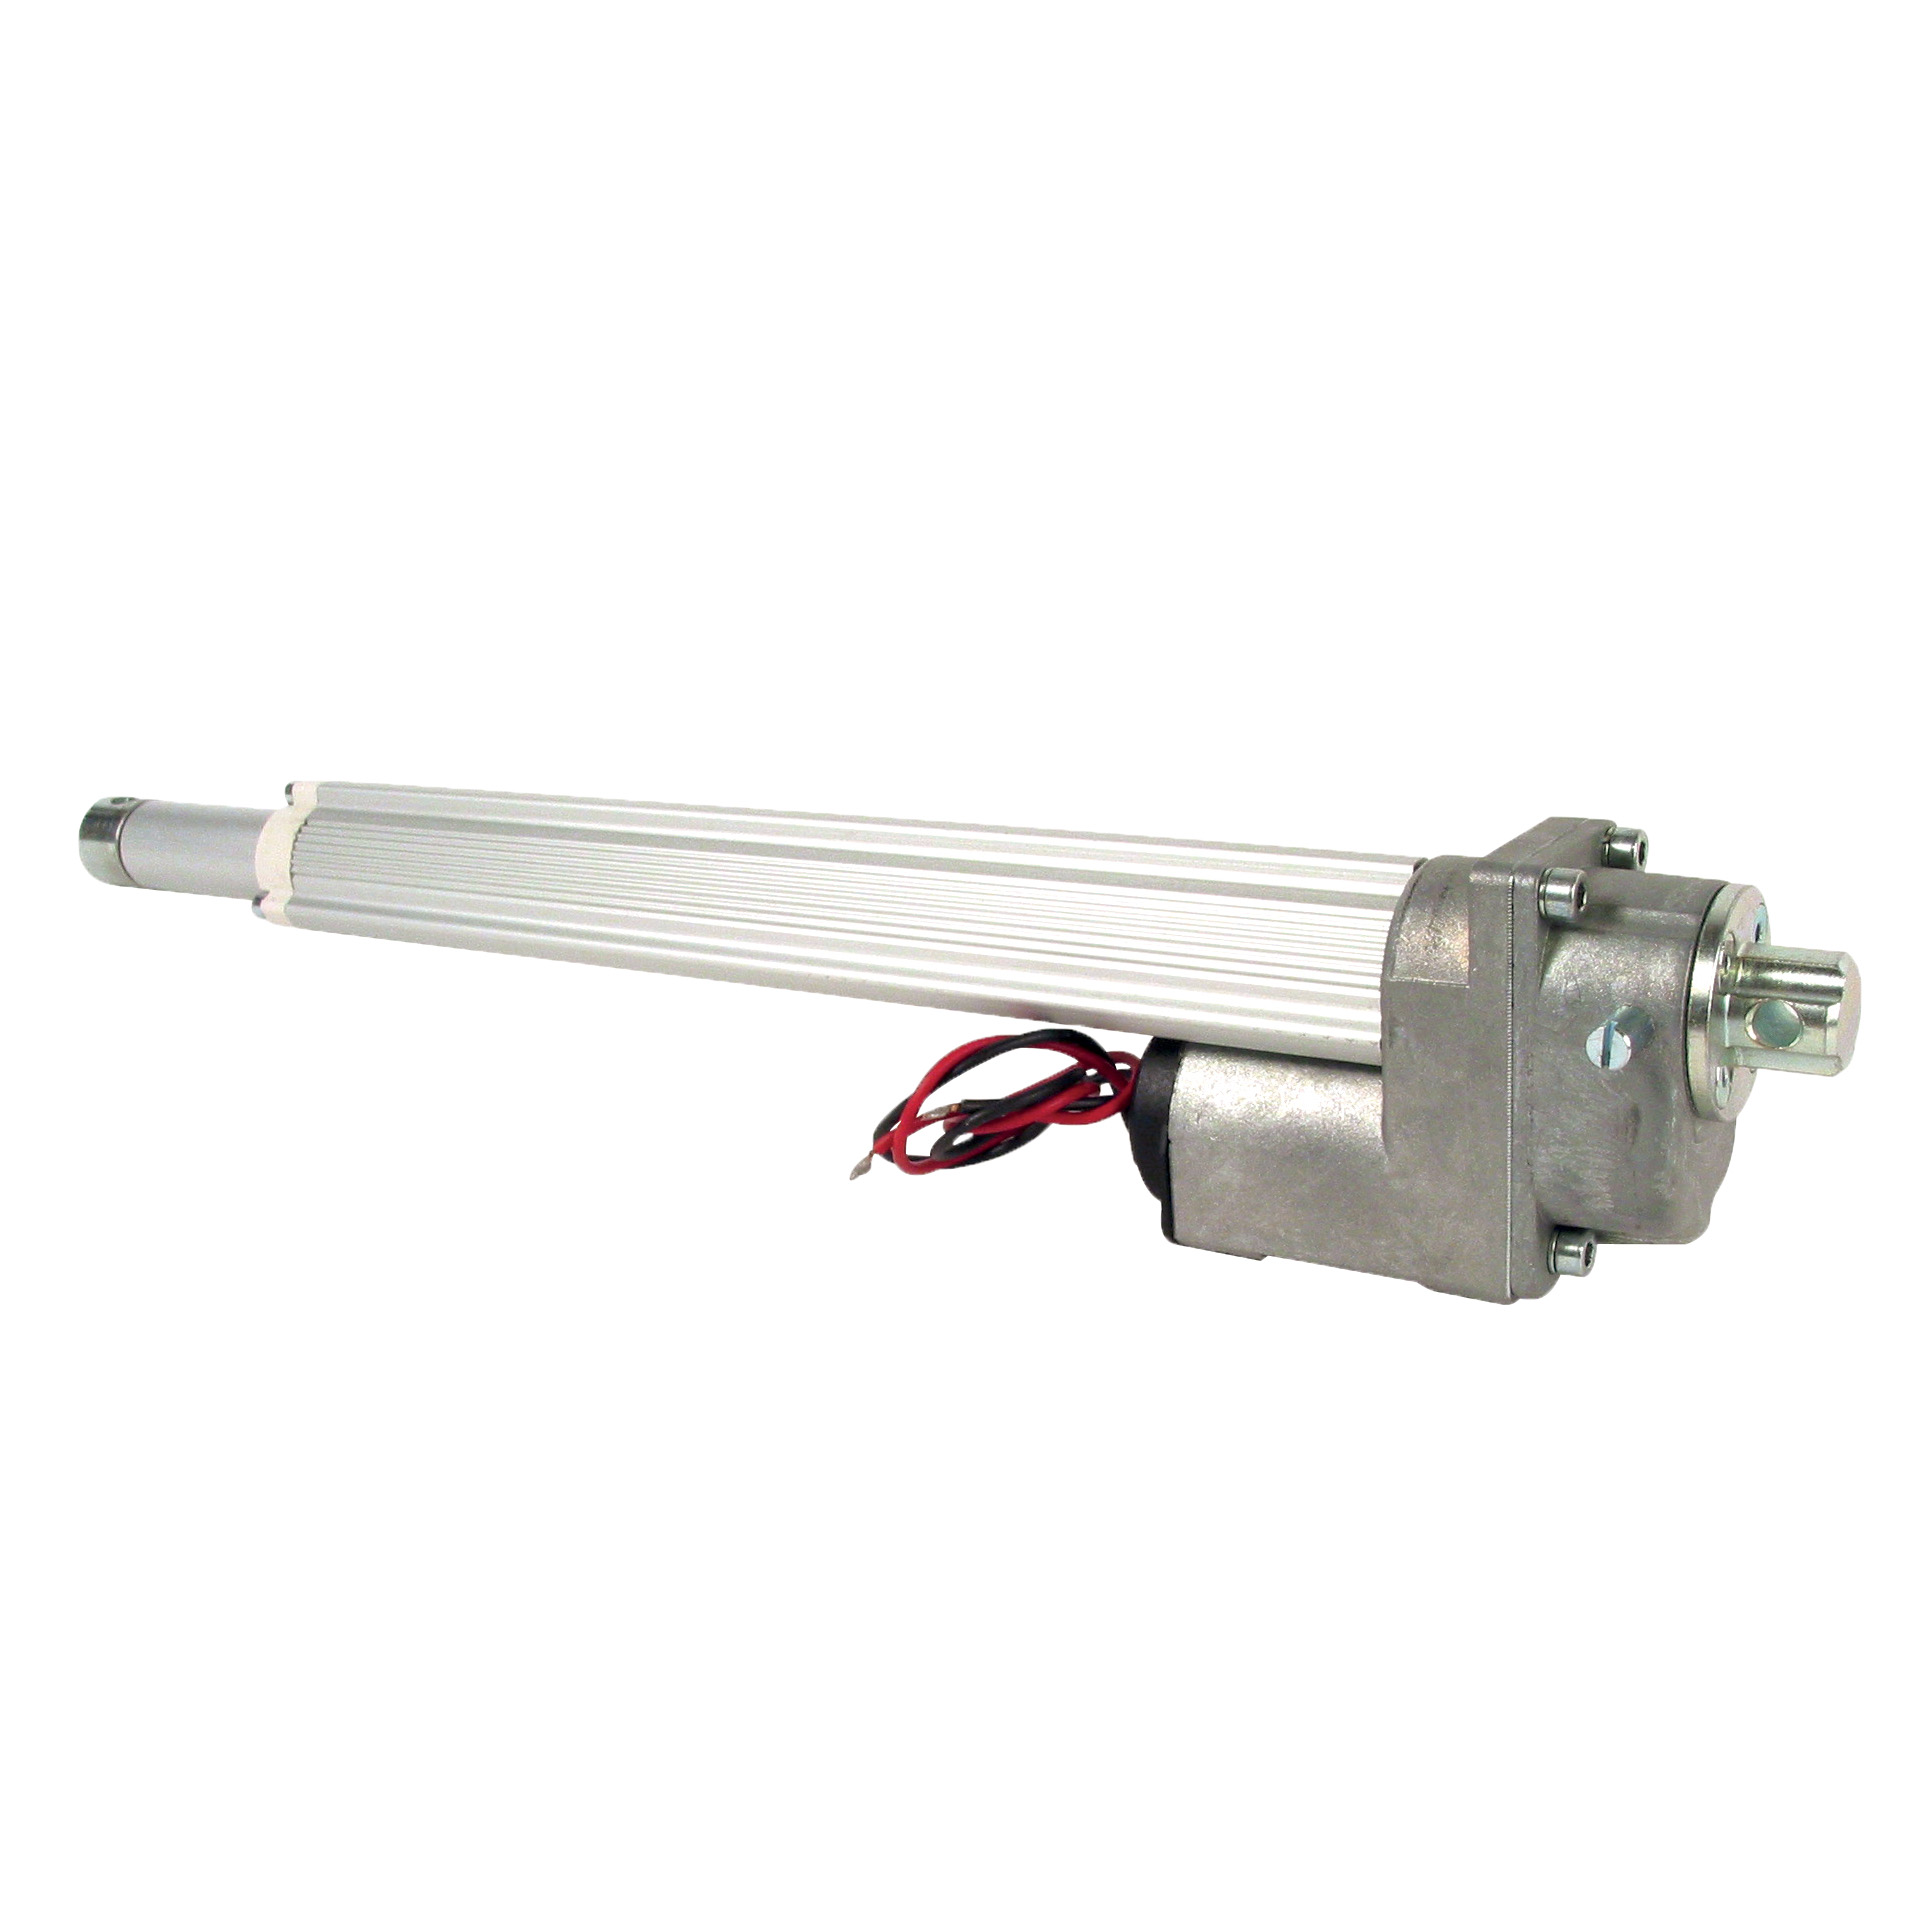 Miniature motorised actuator 1A - 1 amper - 10mm - Without